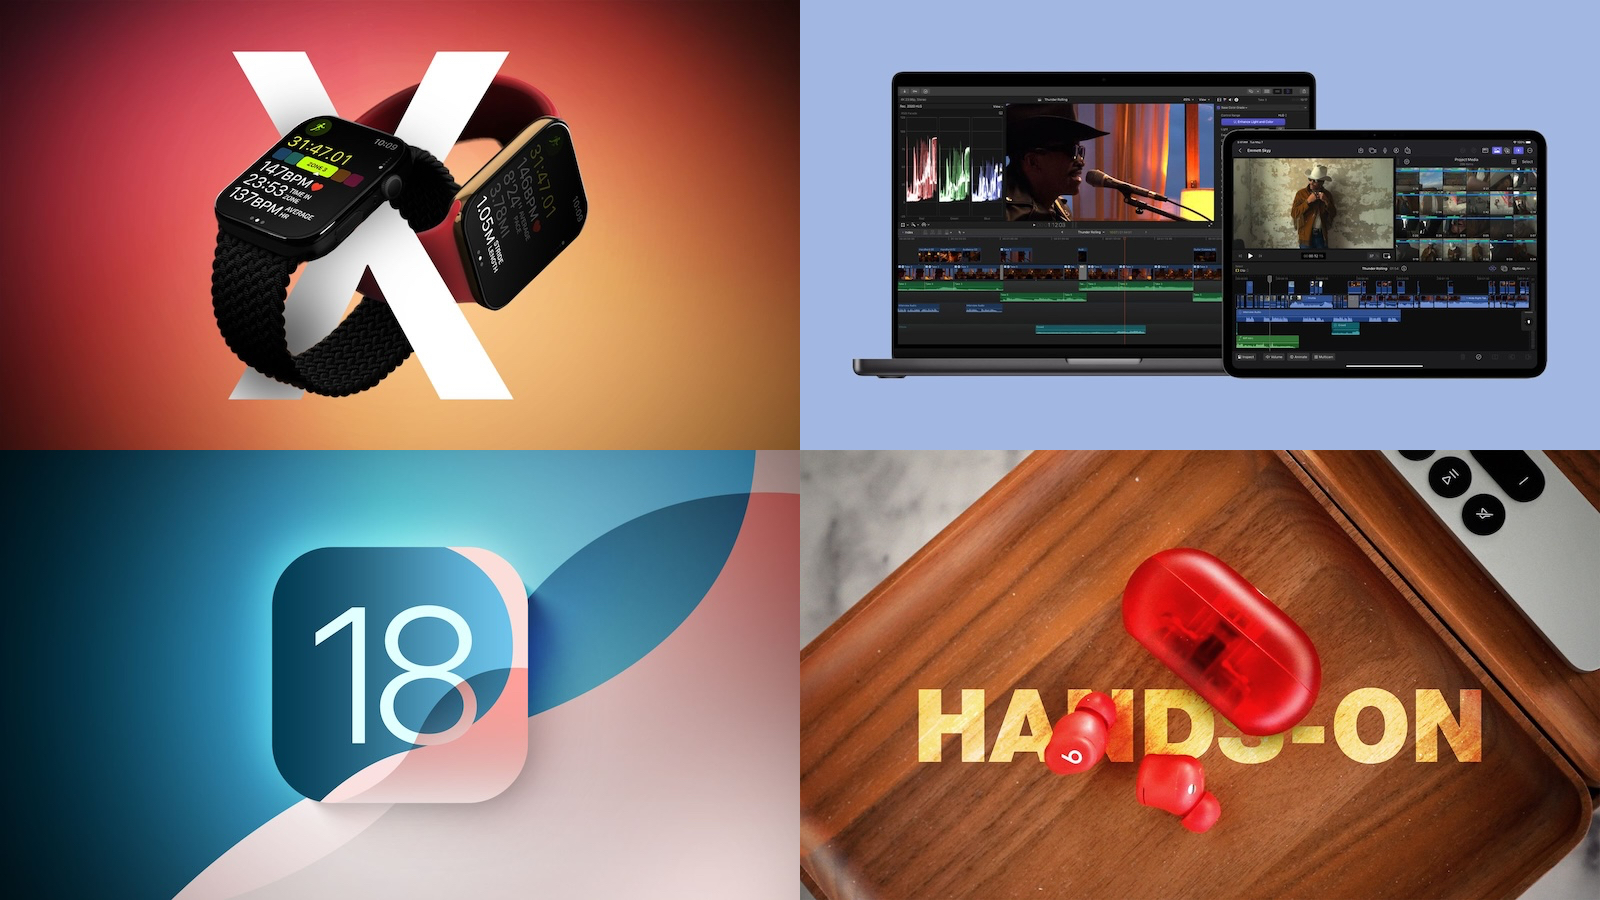 Top Stories: Apple Watch X Rumors, New Final Cut App for iPhone, and More